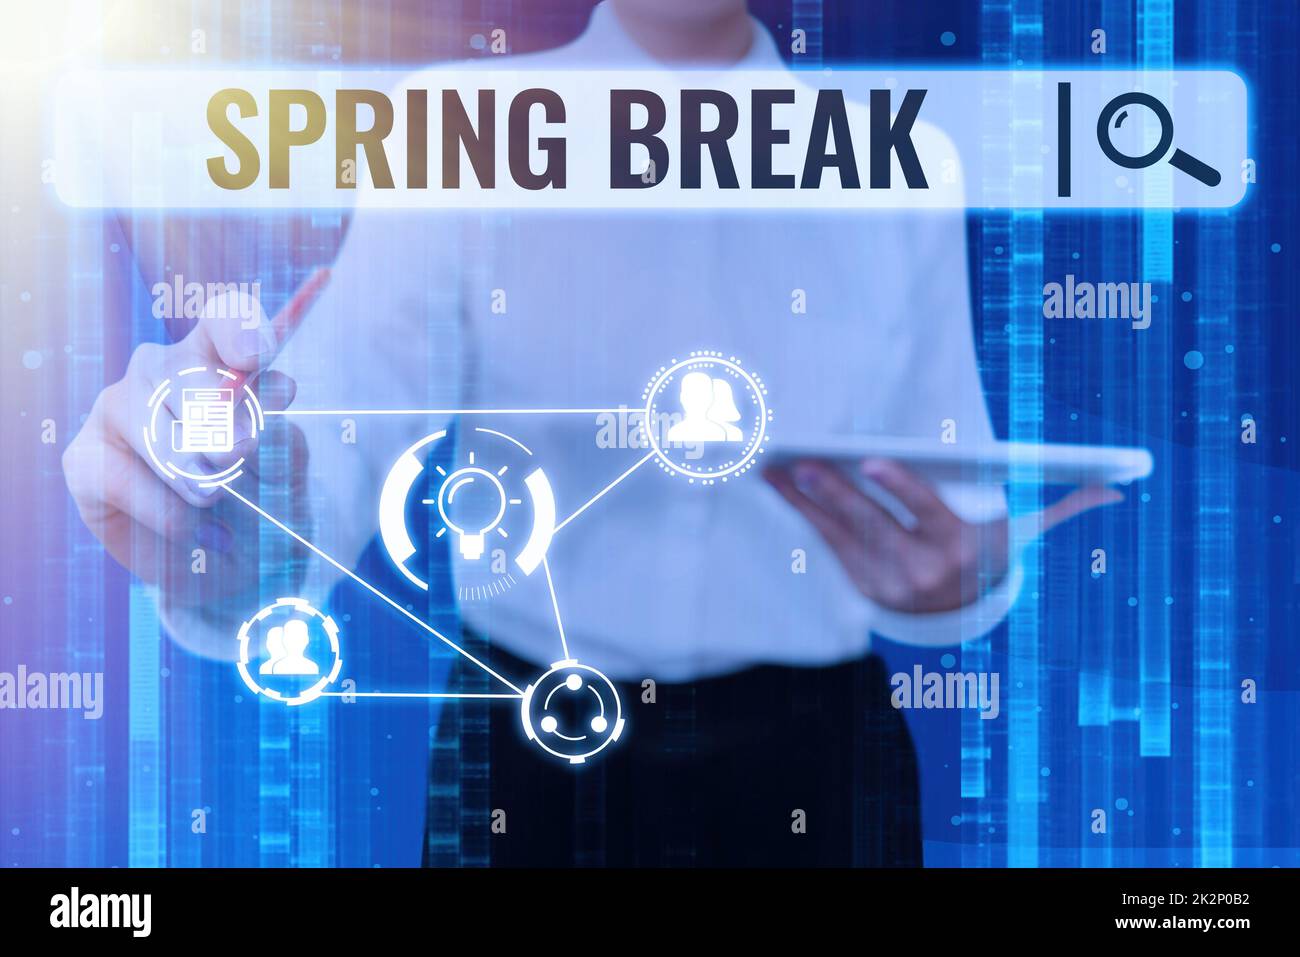 Sign displaying Spring Break. Concept meaning Vacation period at school and universities during spring Lady in suit poins pen holds tablet achieving global innovative thinking. Stock Photo